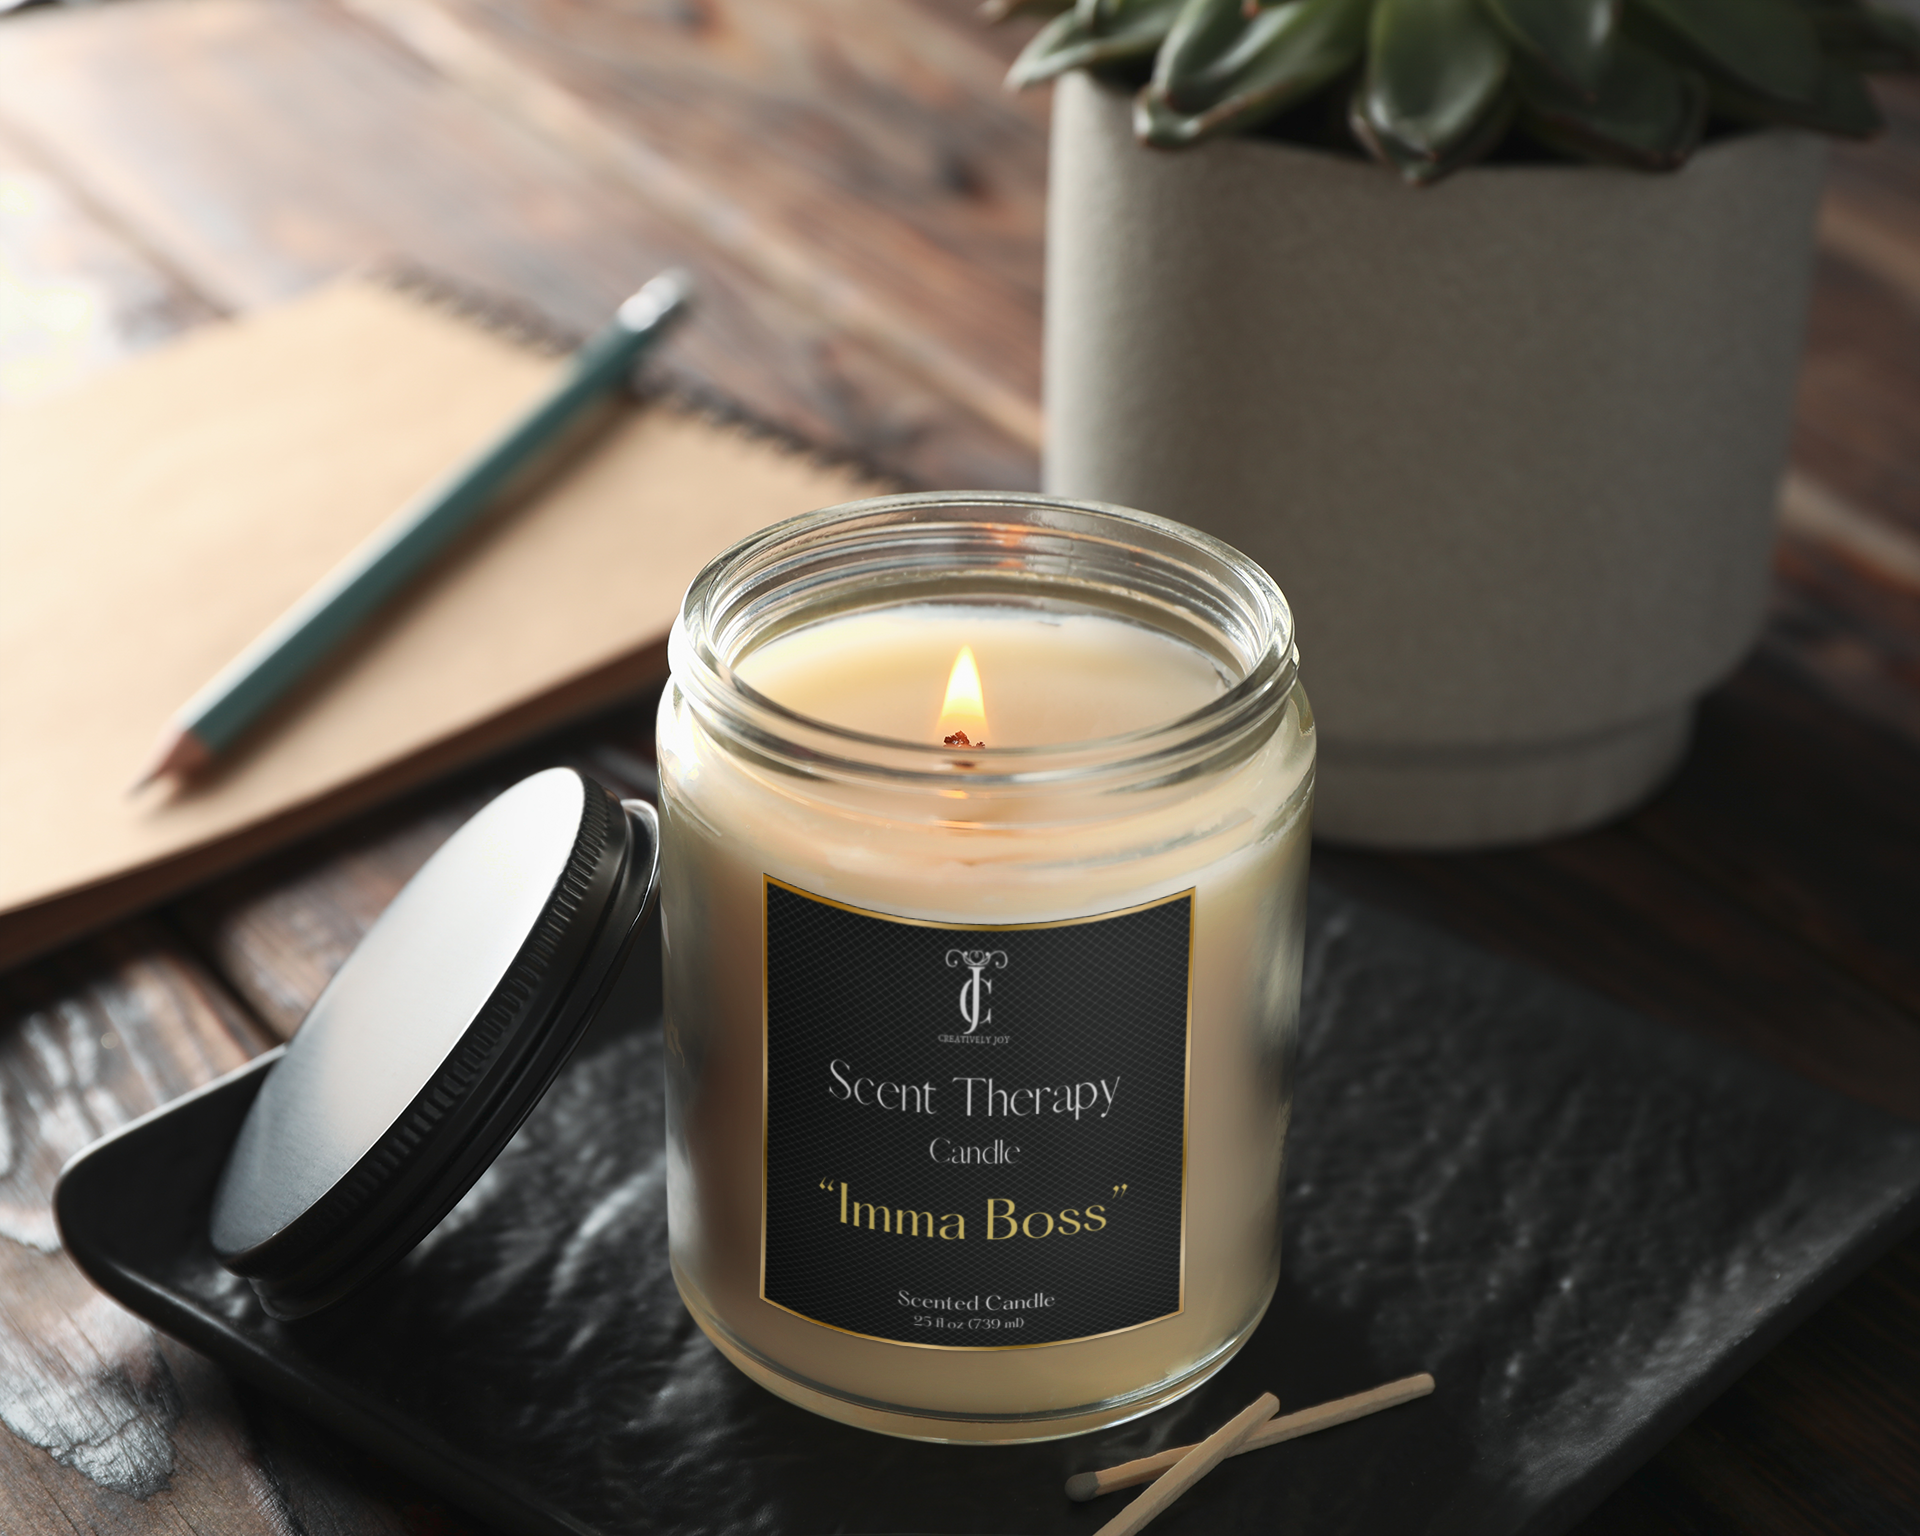 "IMMA BOSS" SCENT THERAPY CANDLES